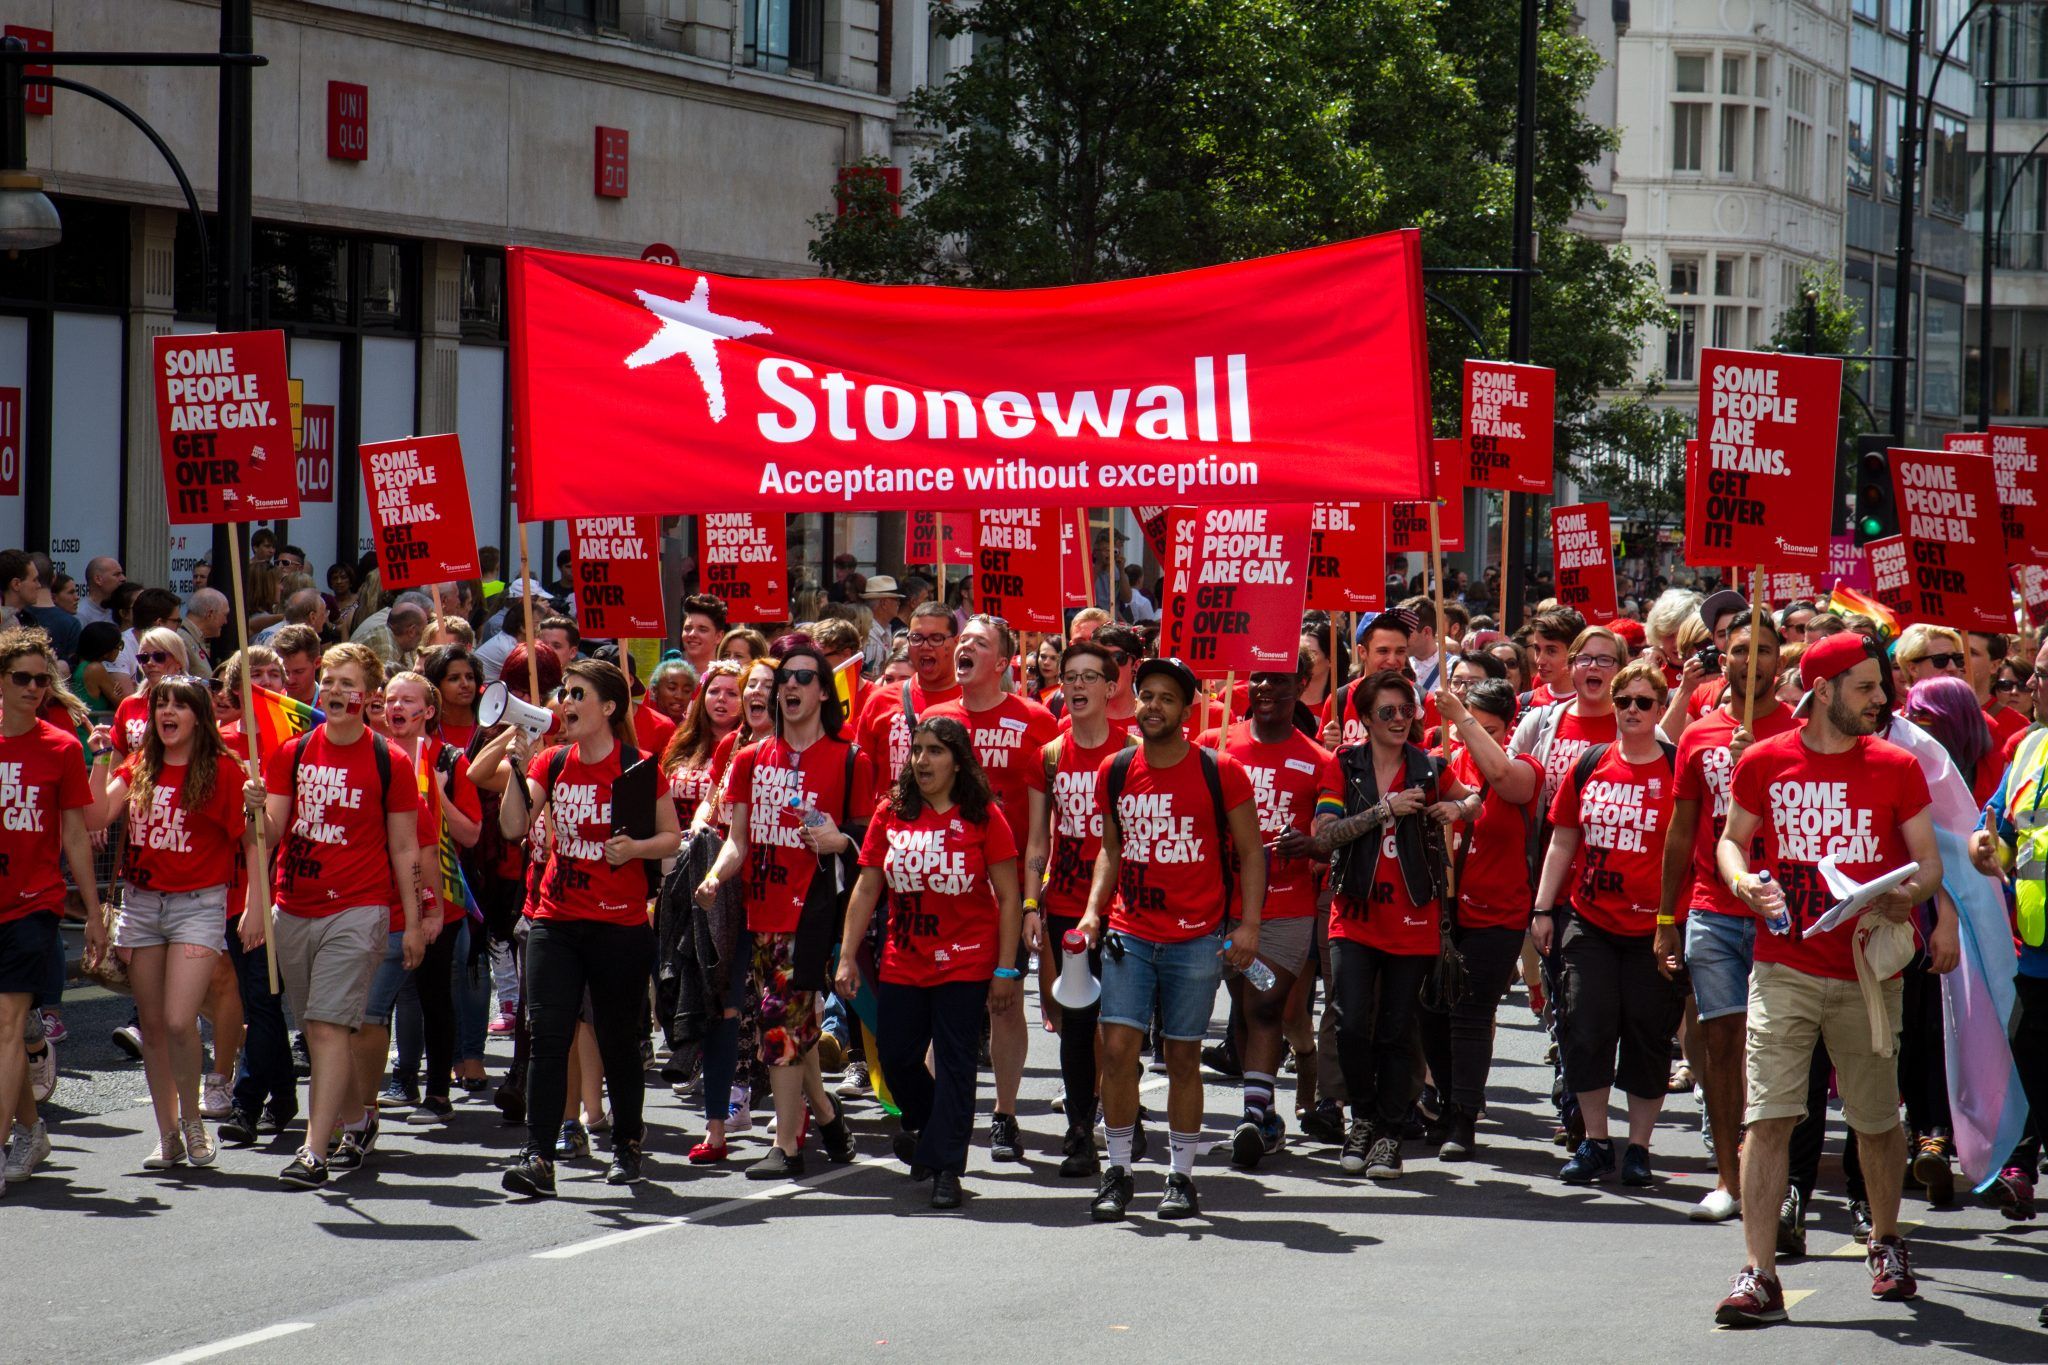 People supporting the organization Stonewall which works for the equality and justice for lesbians, gay men and bisexuals, during the Pride London on the 27th July 2015. People wear banners and t-shirts with the text "Some people are gay, get over it"